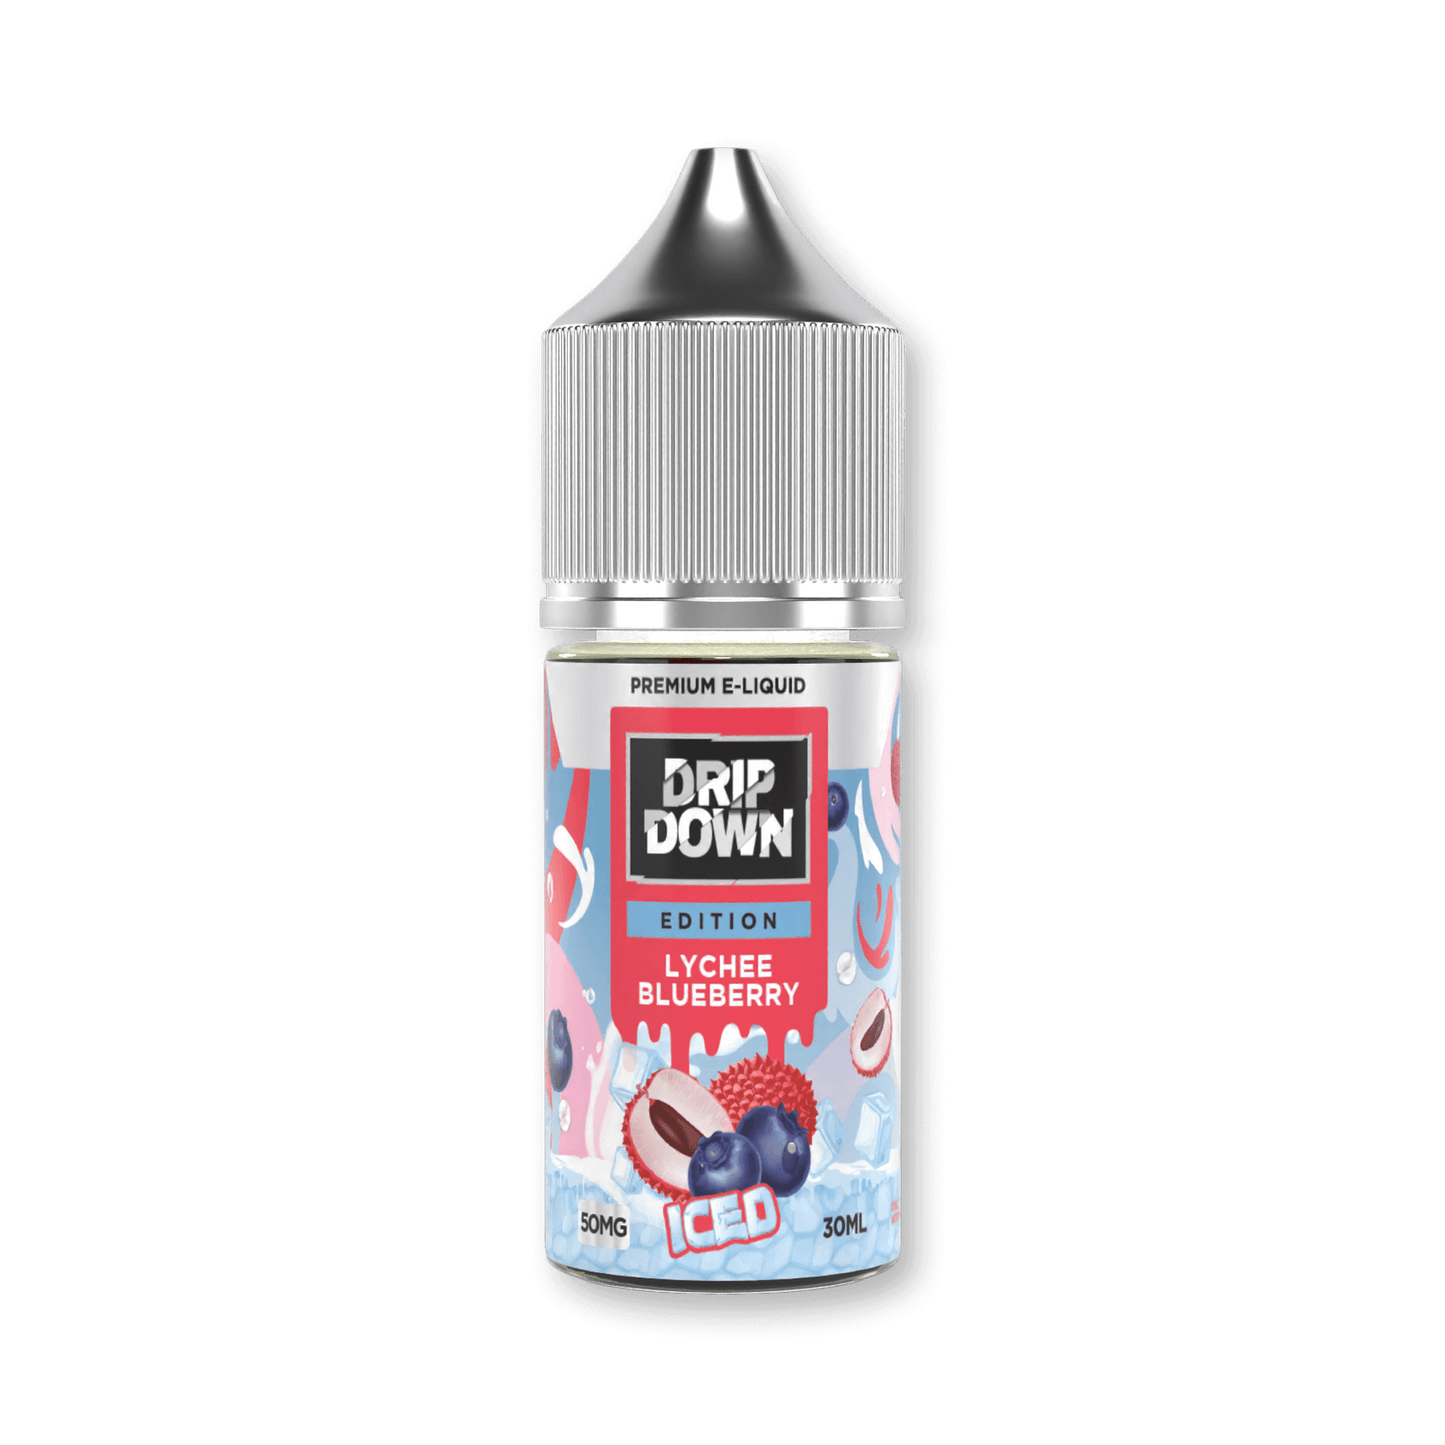 Lychee Blueberry E-Liquid DRIP DOWN Edition Series 30ml bottle Flavor-packed journey Exotic lychee Plump blueberries Meticulously crafted Unparalleled vaping experience ICONA VAPE Shop now Flavor: Lychee, Blueberry, ICE Series: Edition Size: 30ml Nicotine Strength: 25mg, 50mg Child Resistant Cap